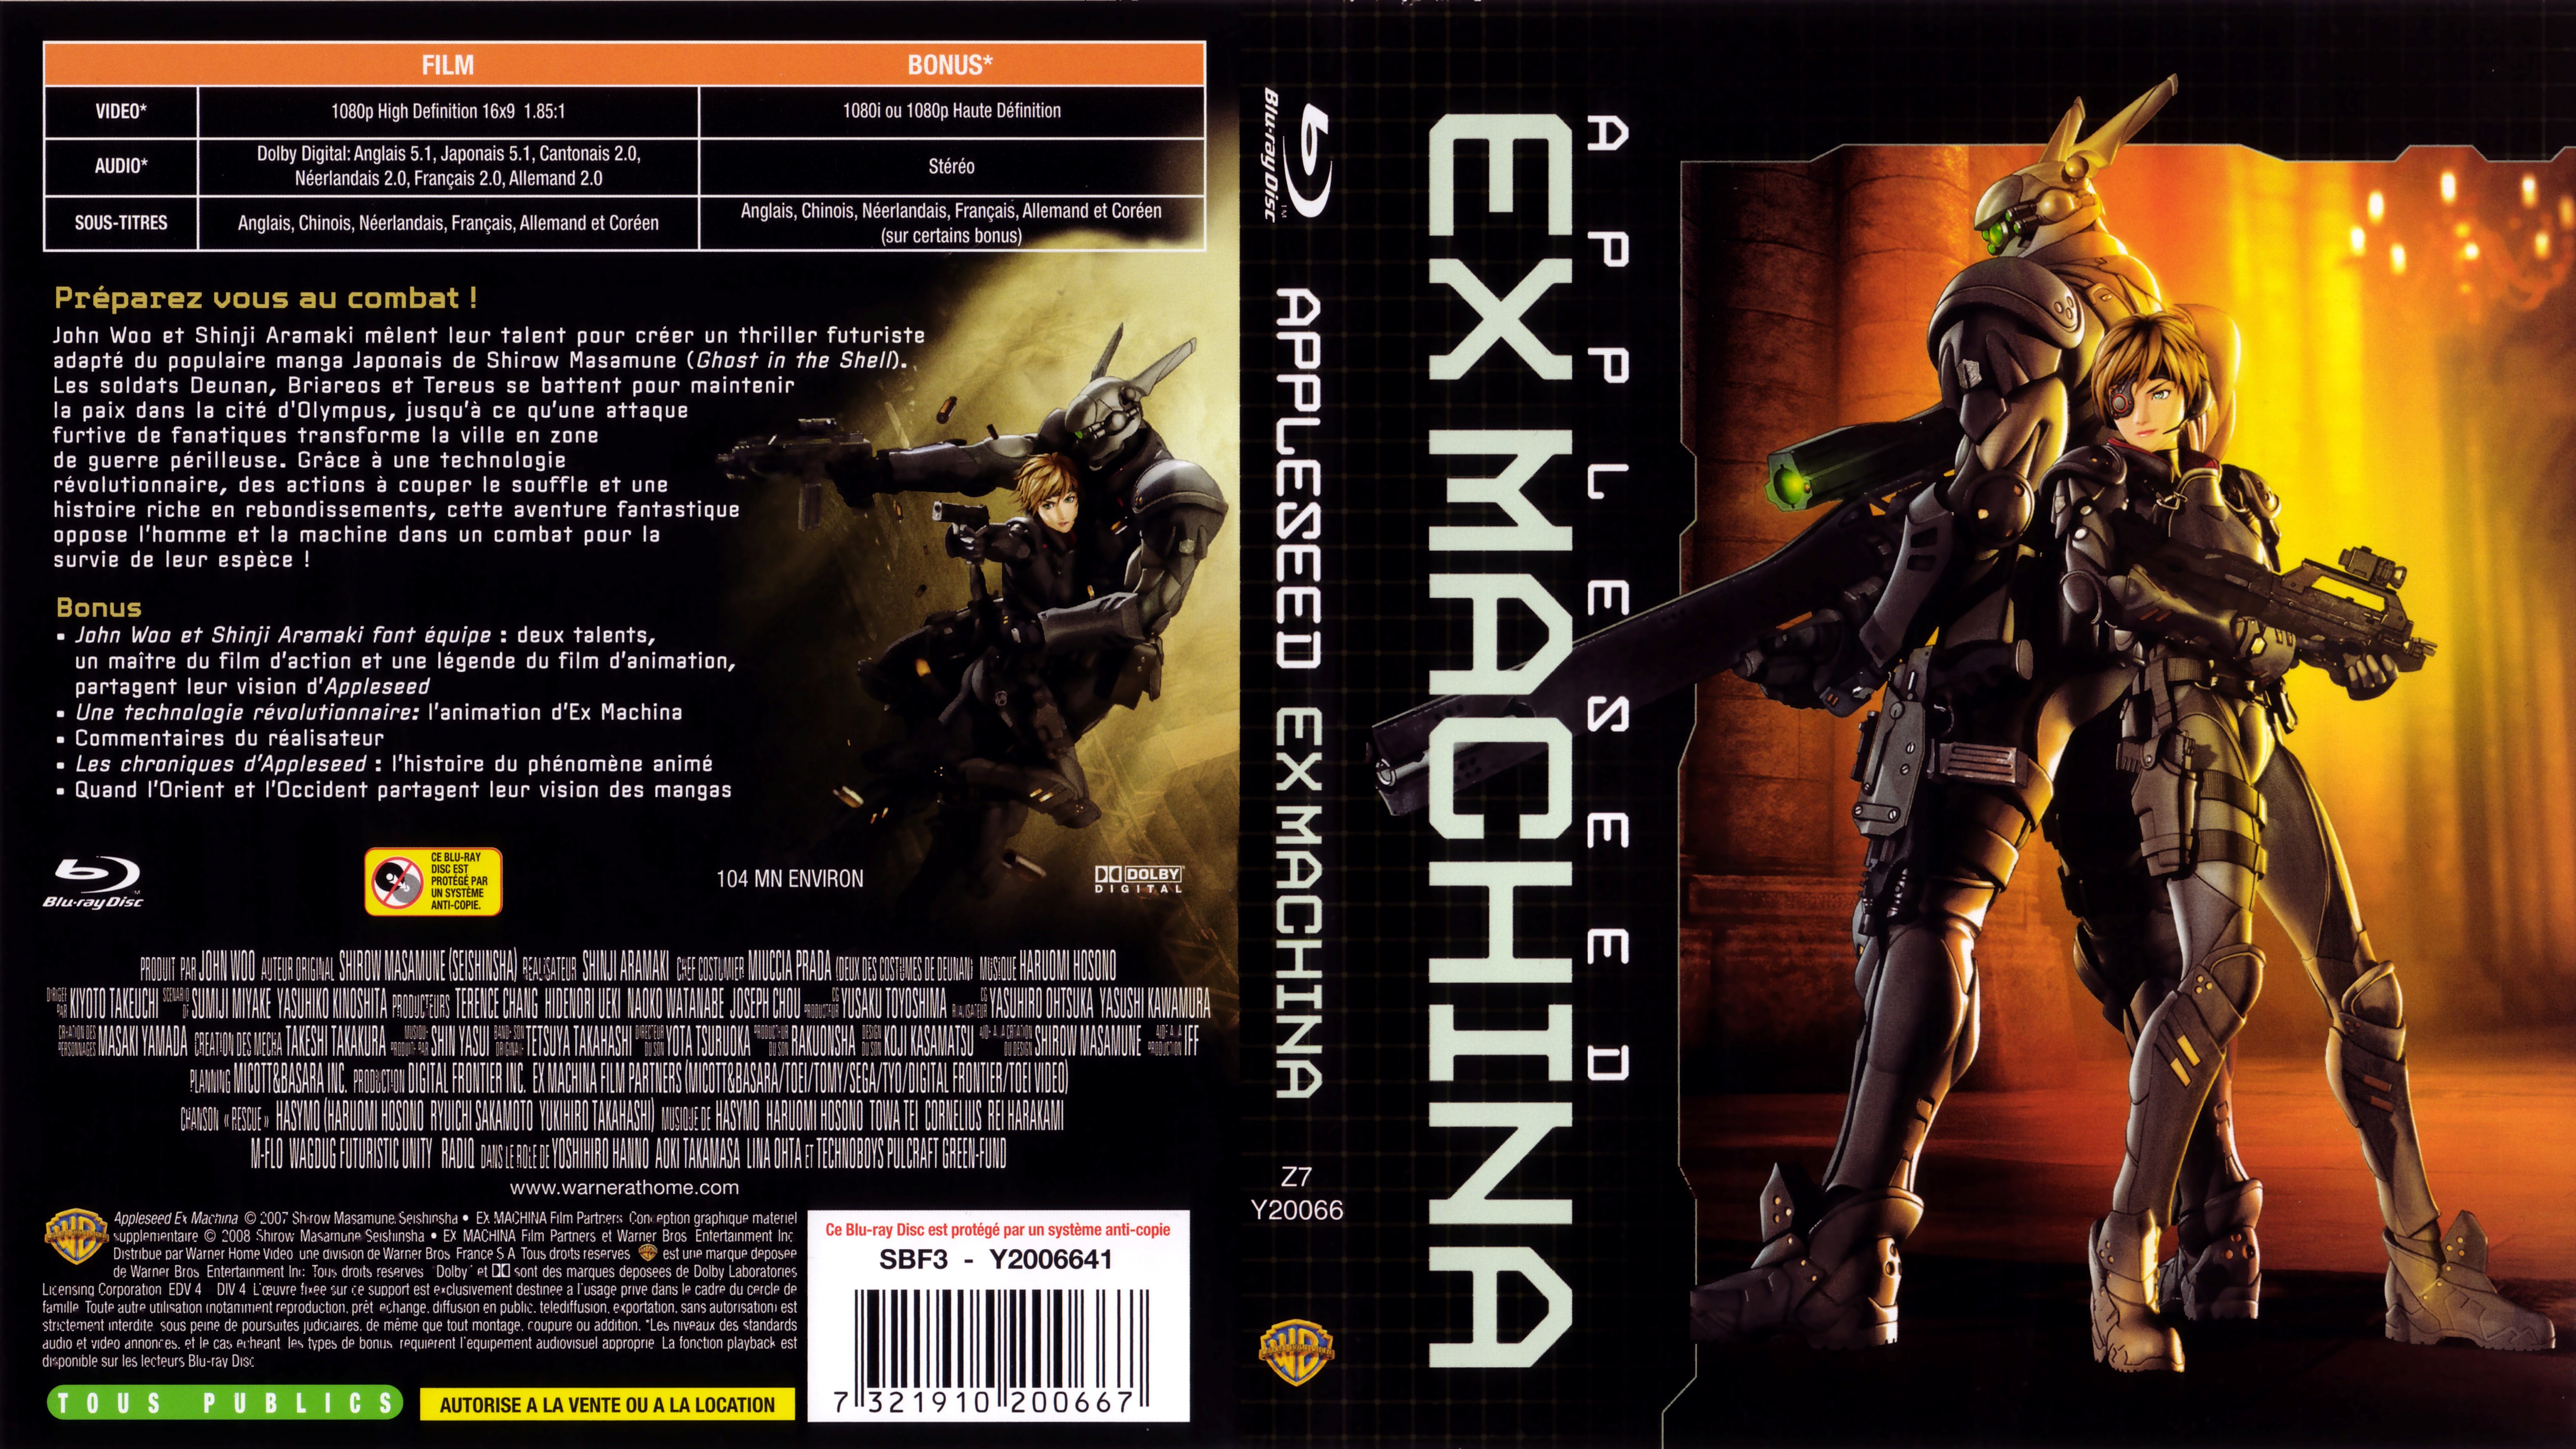 Jaquette DVD Appleseed ExMachina (BLU-RAY)